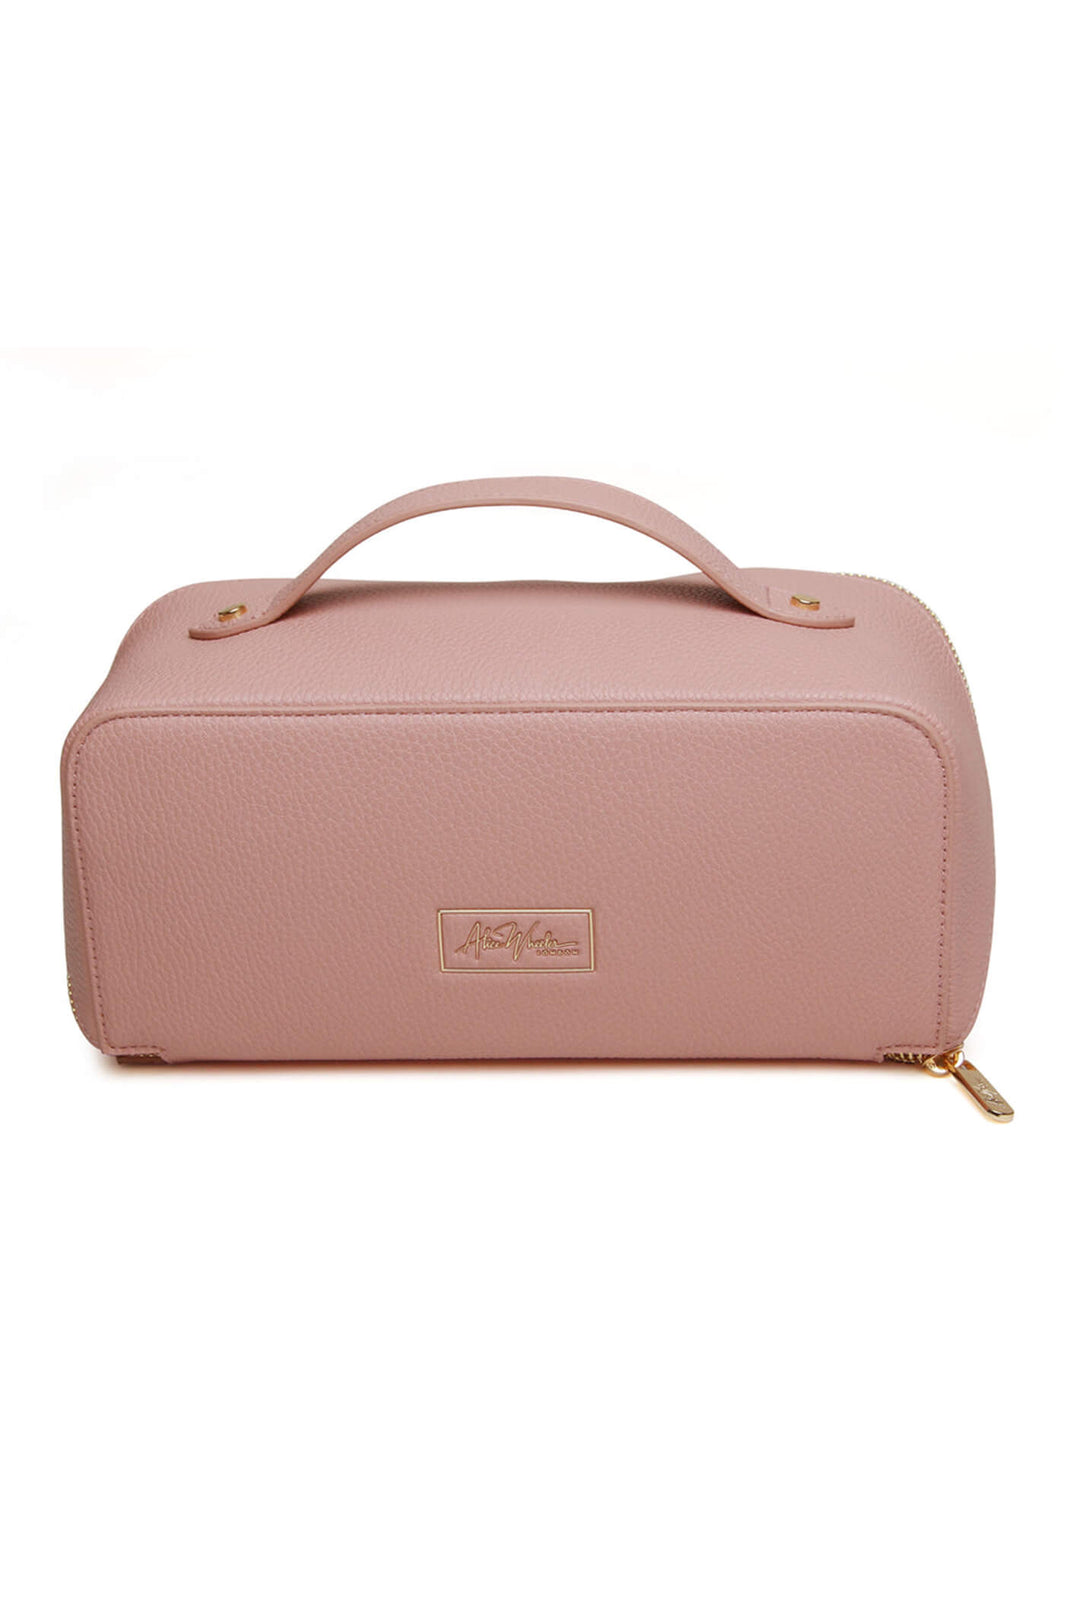 Alice Wheeler AW0258 Large Pink Train Case - Shirley Allum Boutique